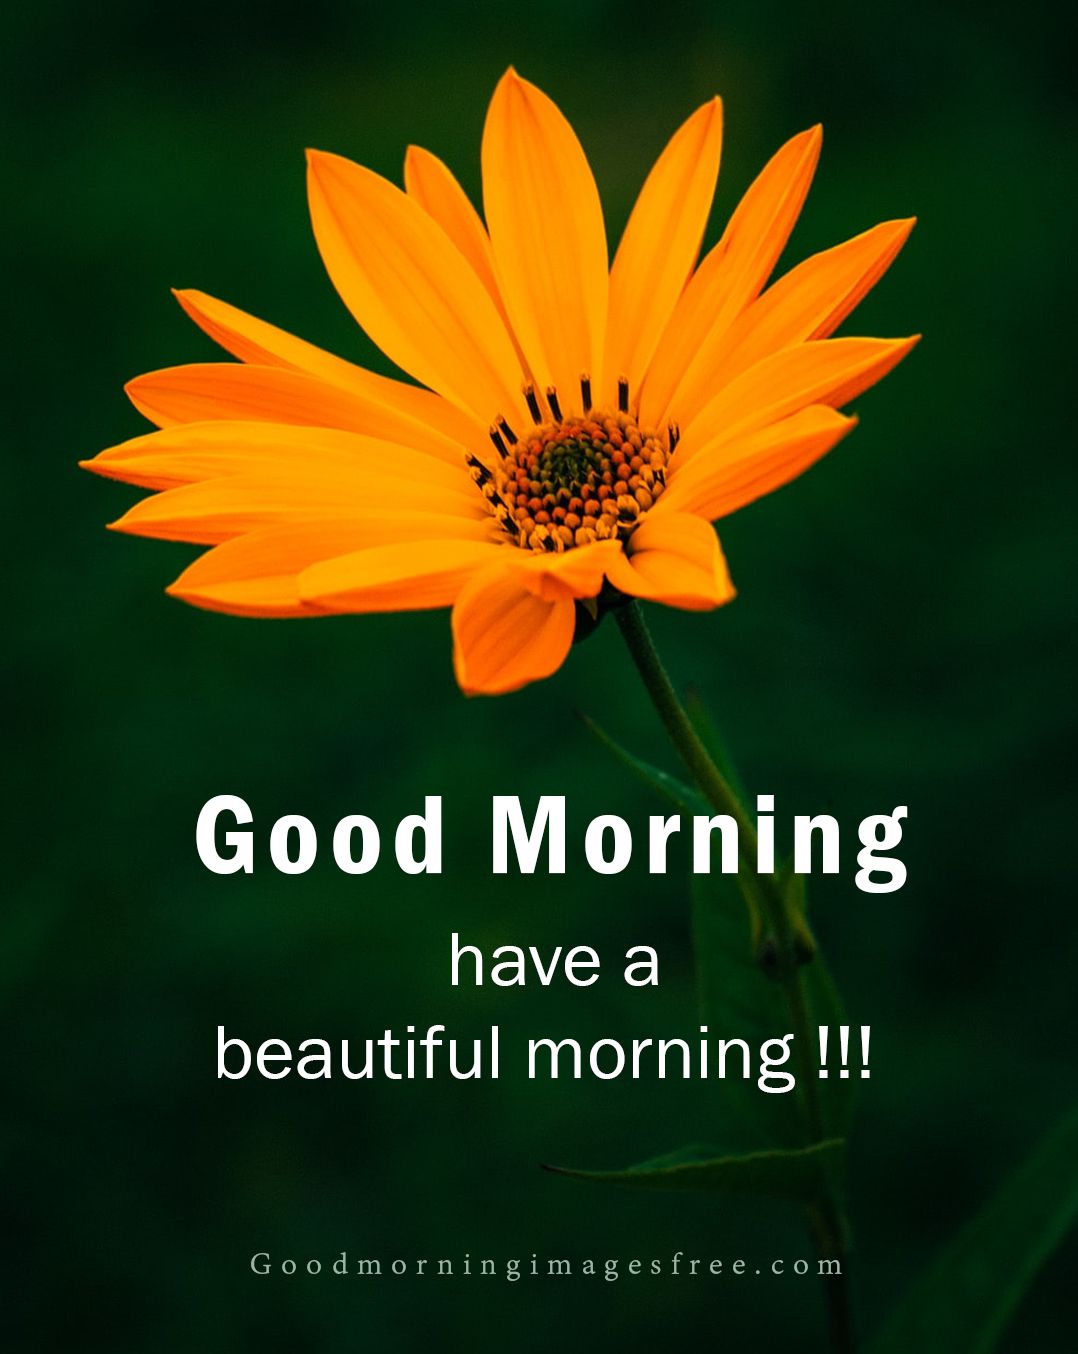 Beautiful Good Morning Images Free - Infoupdate.org